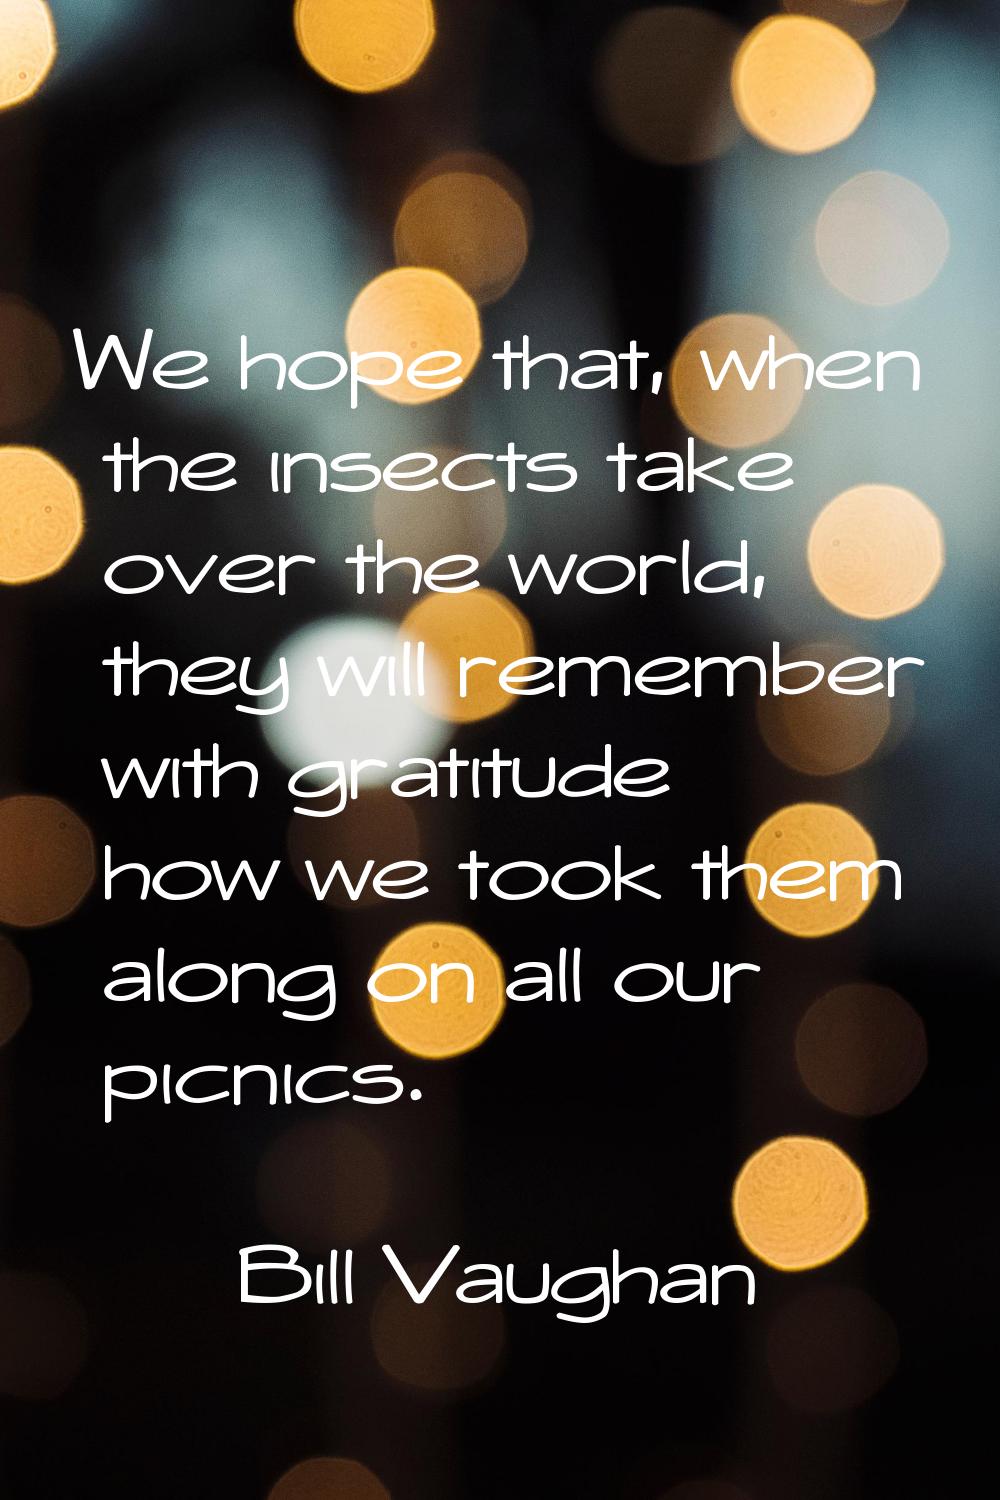 We hope that, when the insects take over the world, they will remember with gratitude how we took t